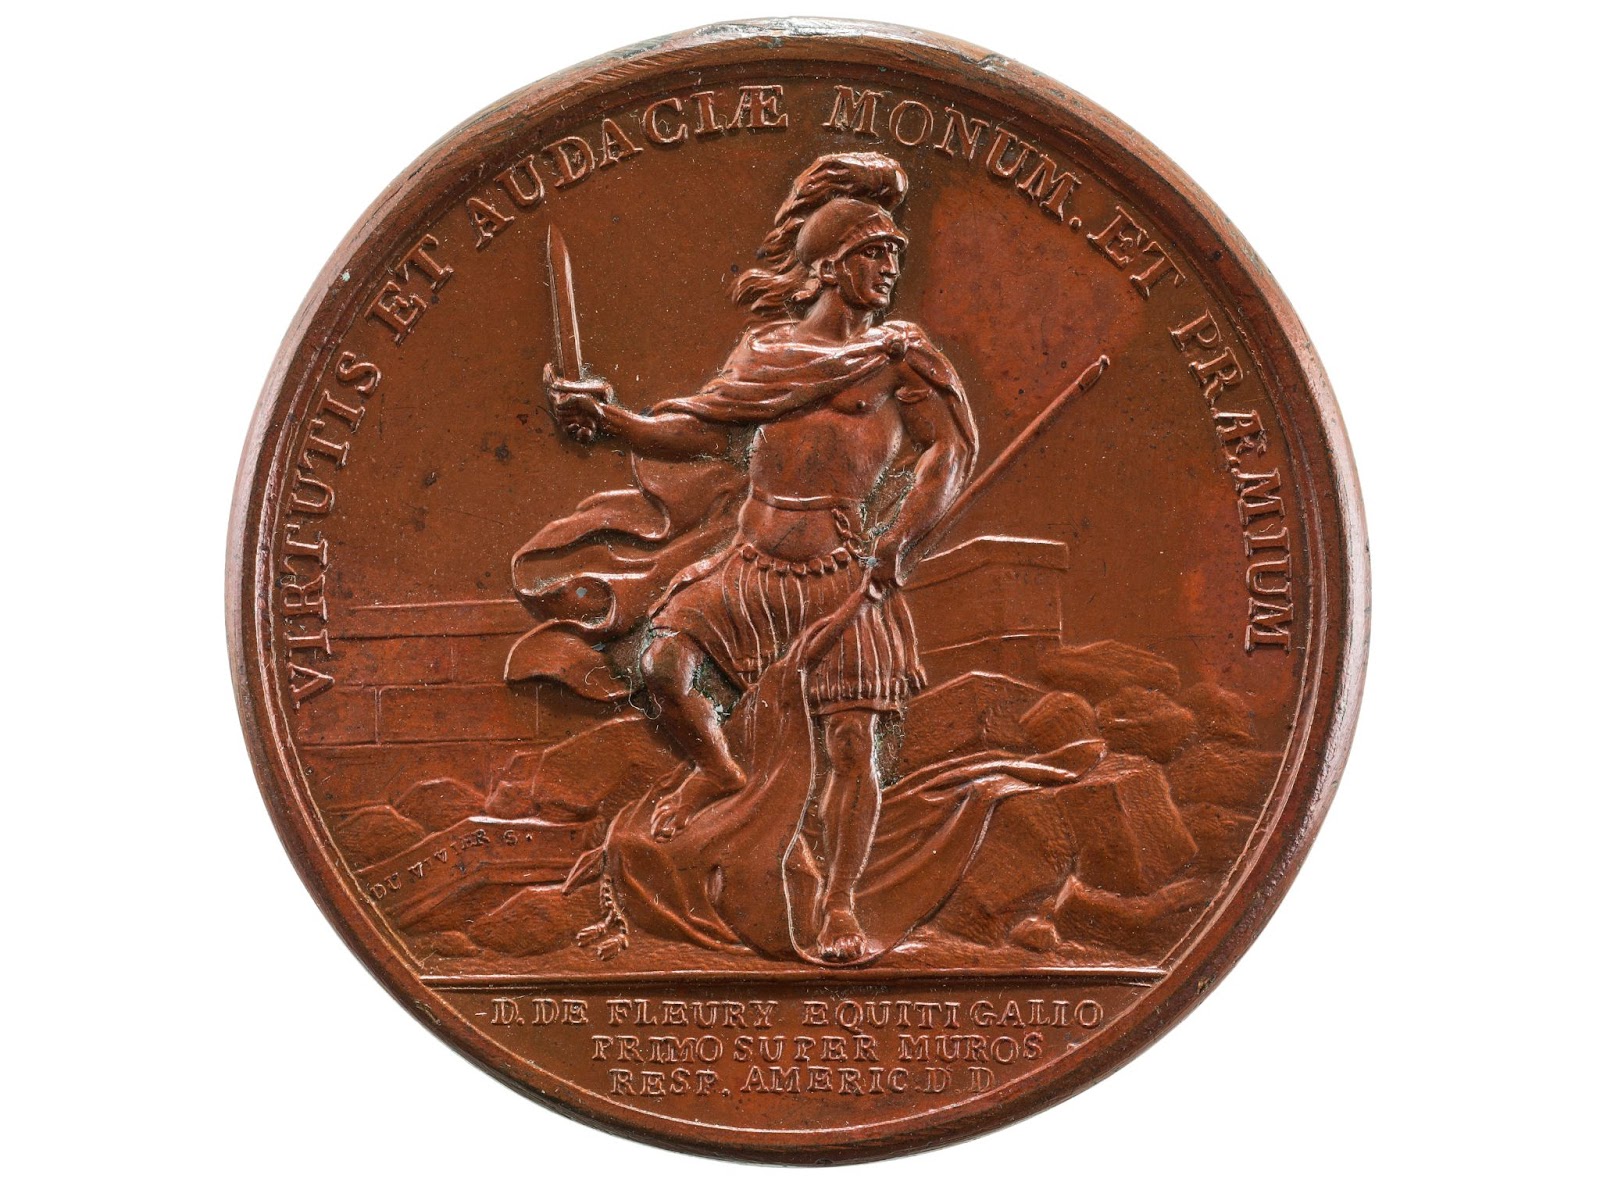 Revolutionary War medals confirmed the U.S.’s independence. Here’s how: